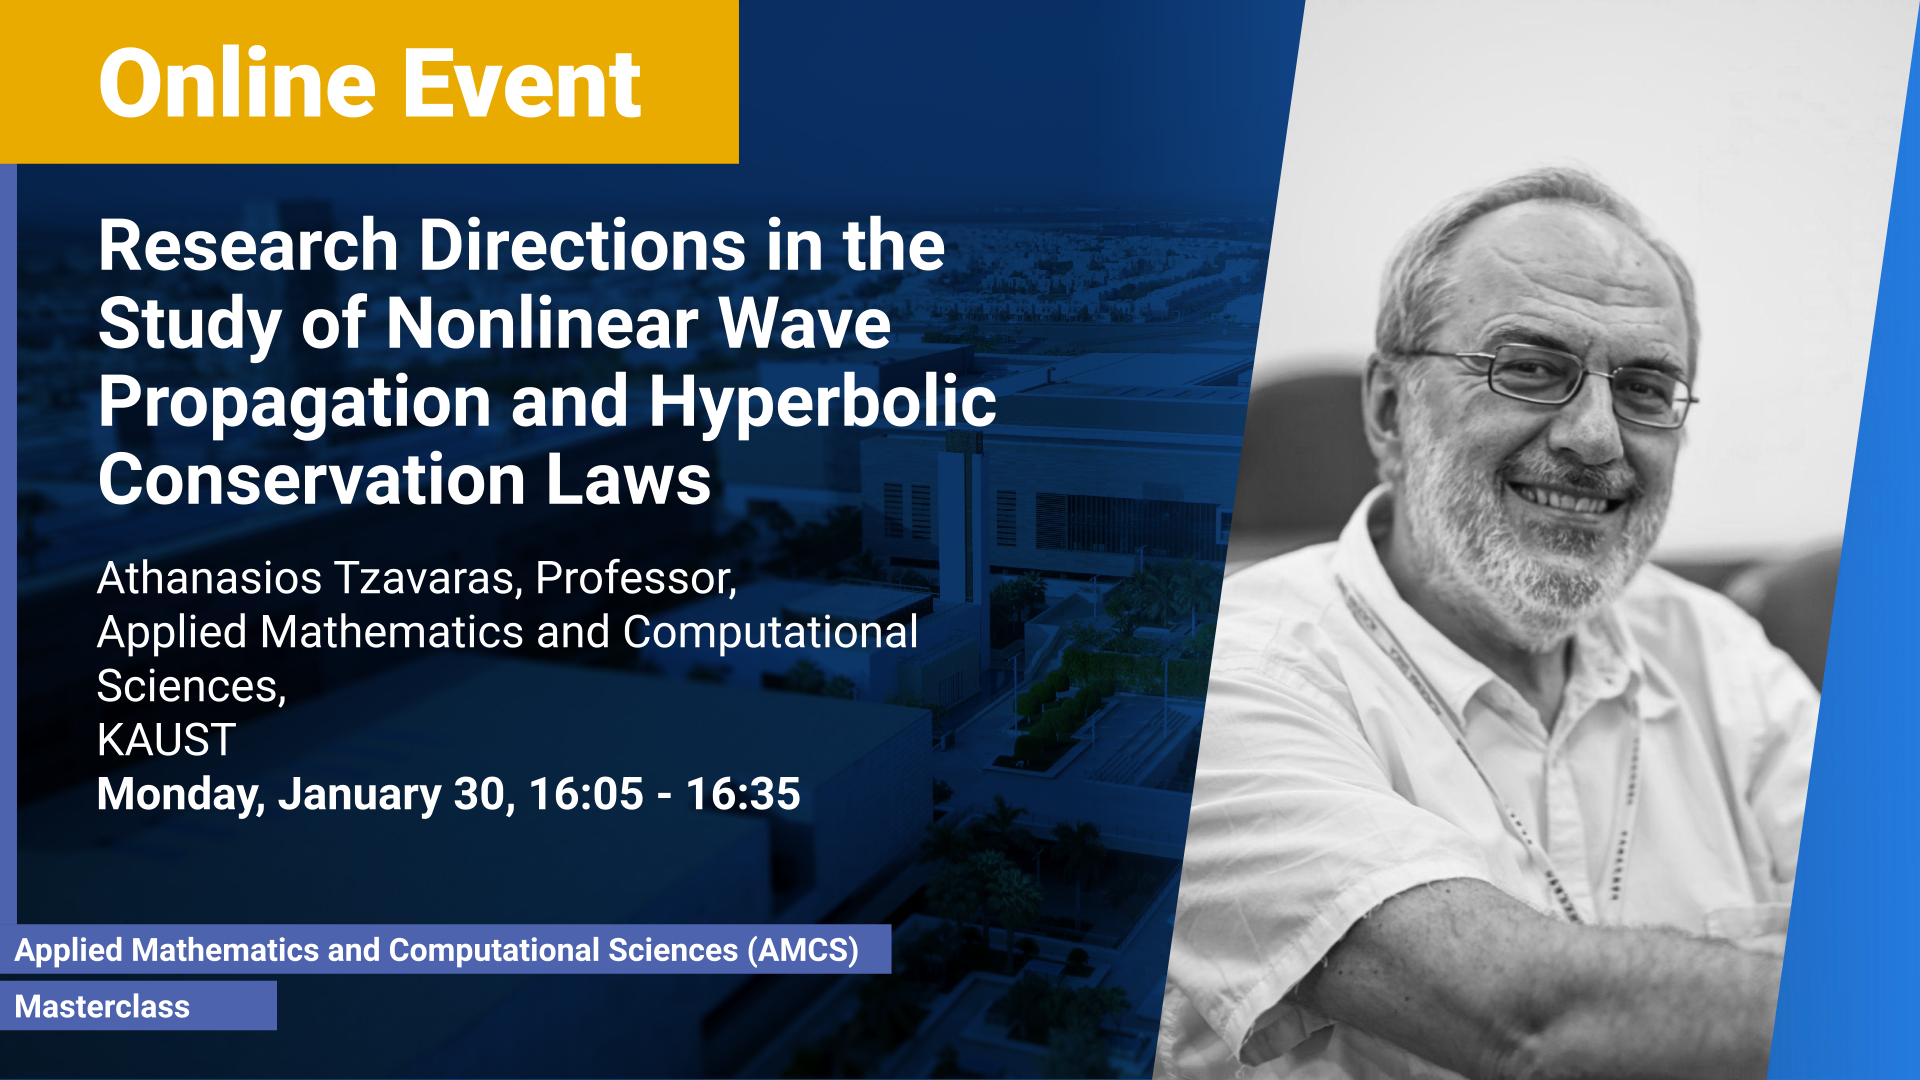 KAUST-CEMSE-AMCS-Masterclass-Athanasios-Tzavaras-Research-Directions-in-the-Study-of-Nonlinear-Wave